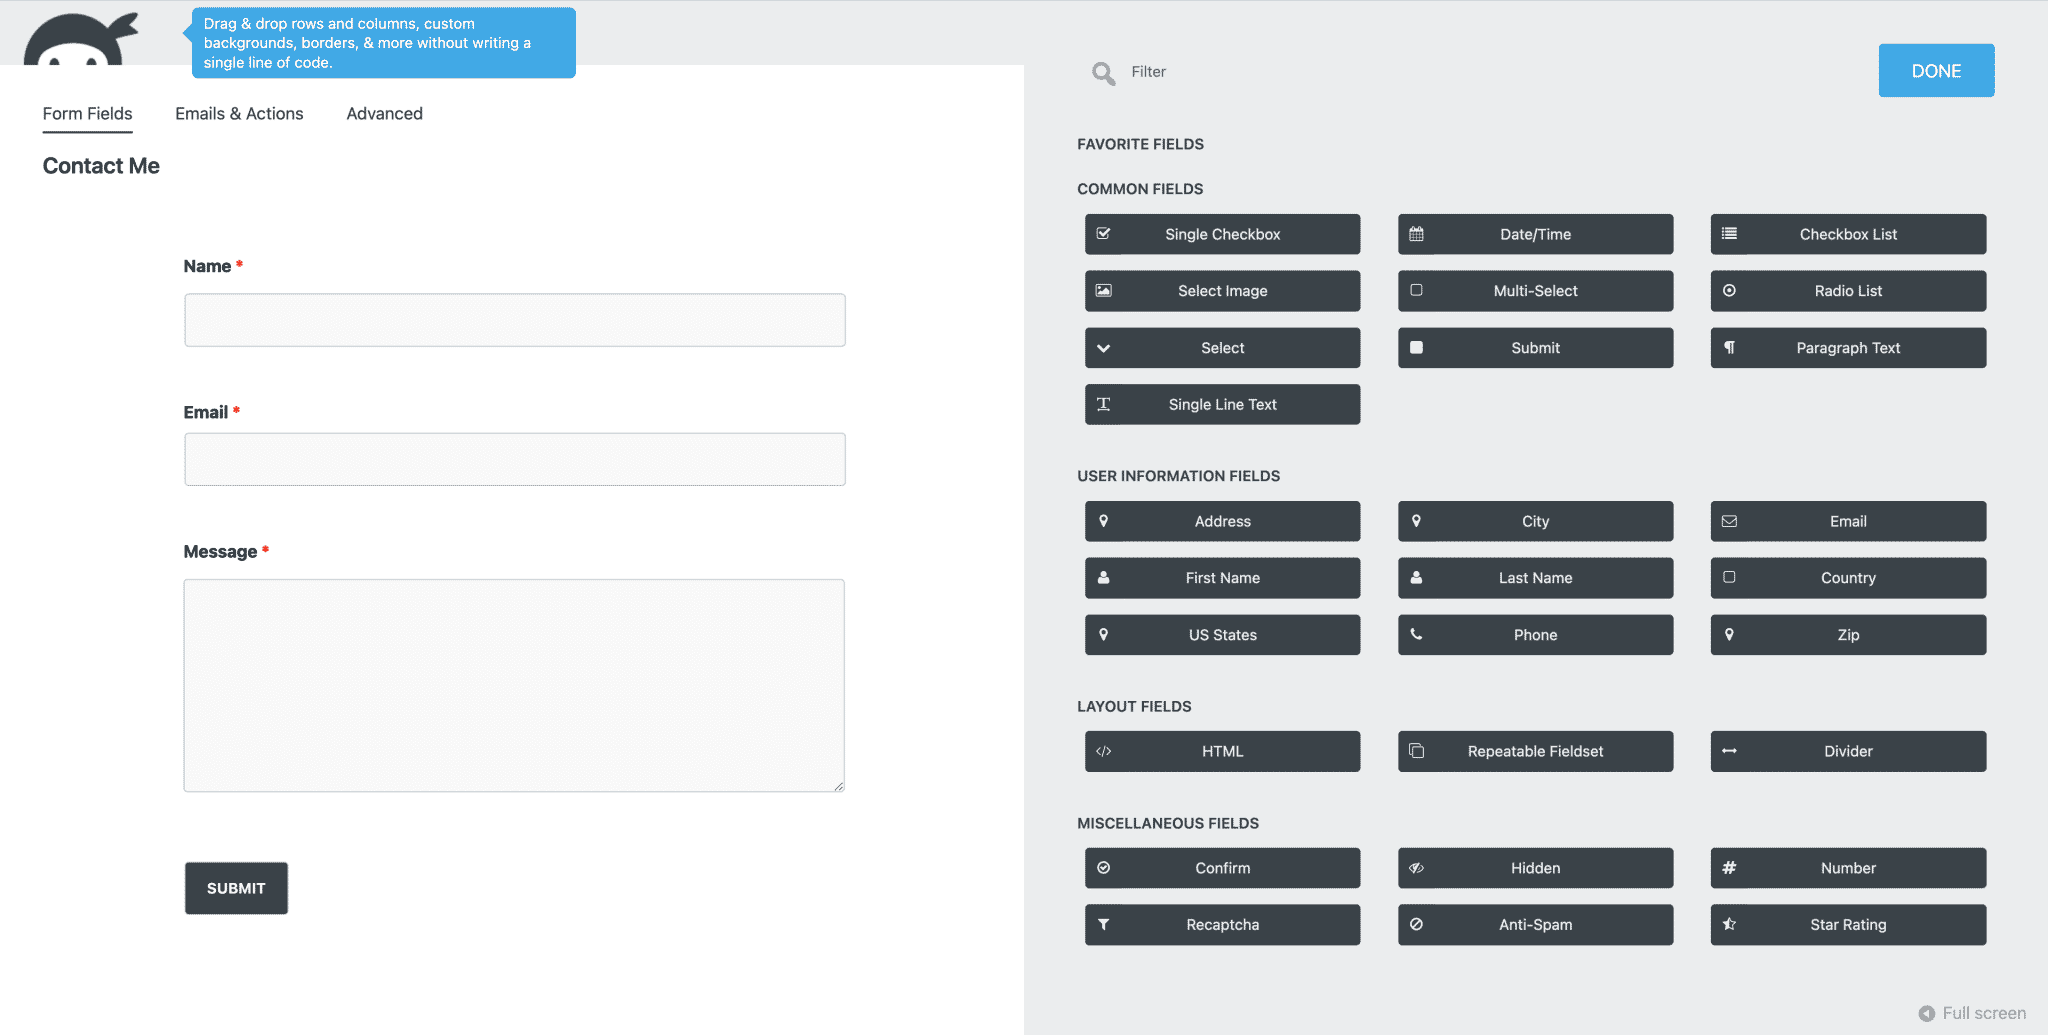 Interface of the Ninja Forms plugin allowing to create contact forms on WordPress.